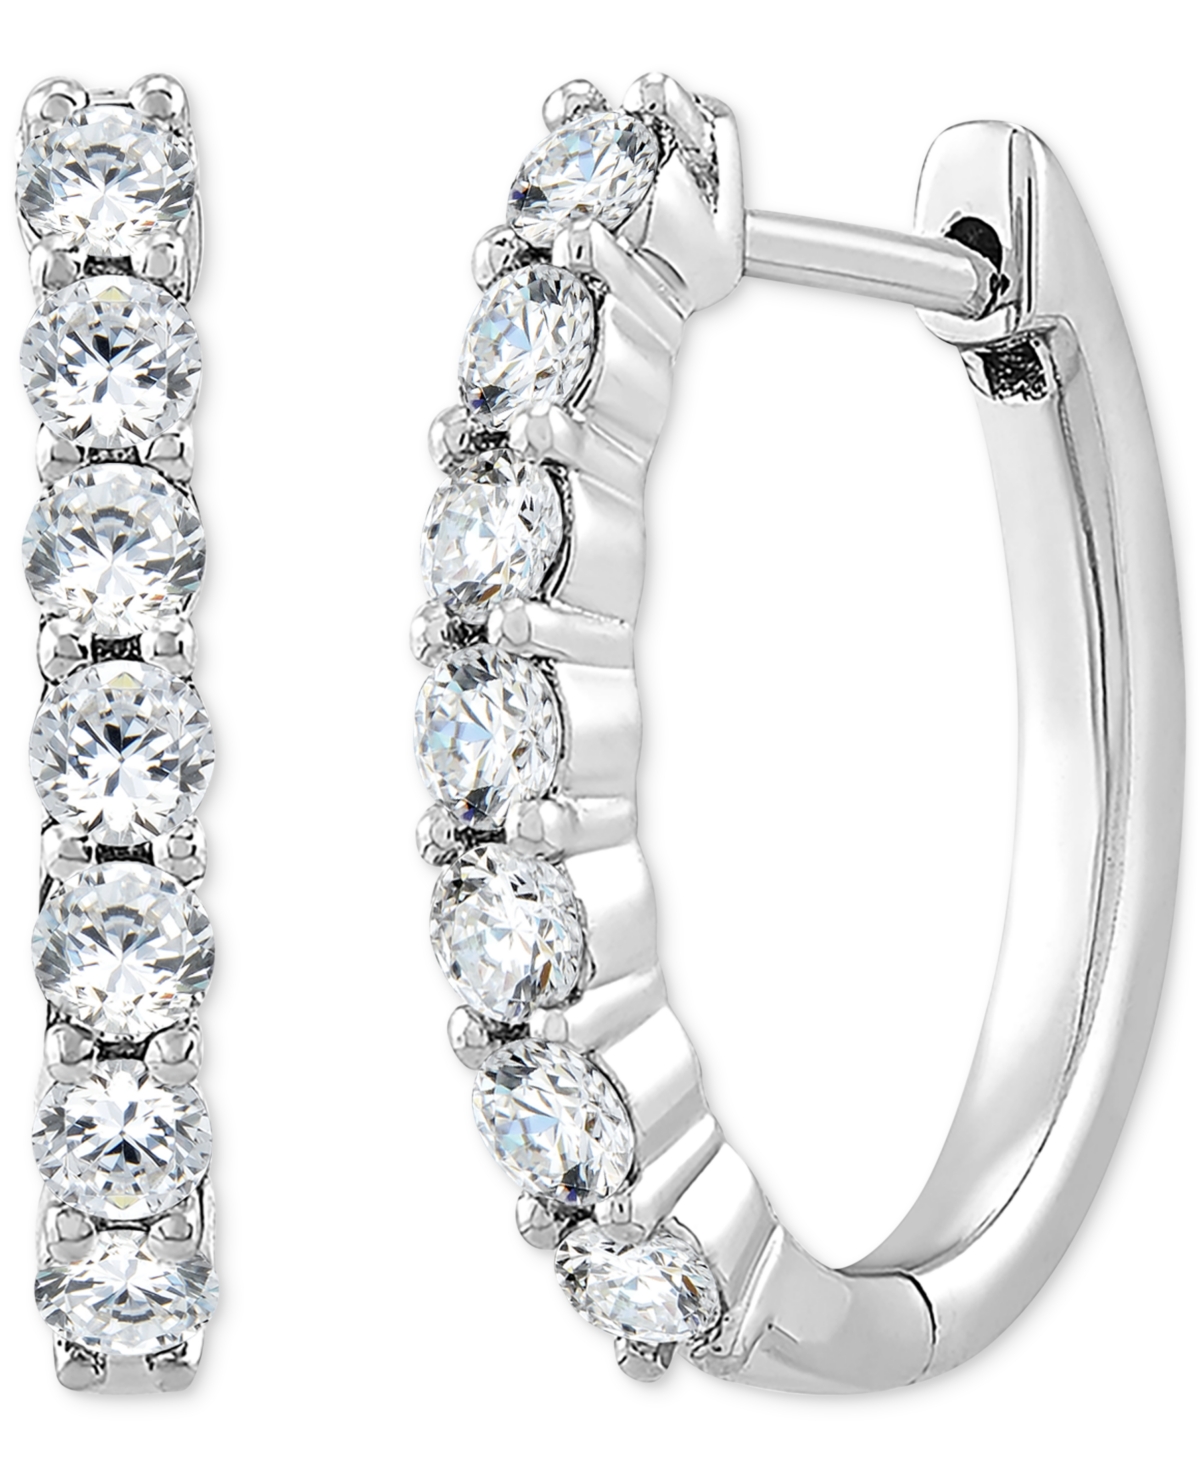 Lab-Created Diamond Small Hoop Earrings (5/8 ct. t.w.) in Sterling Silver - Sterling Silver